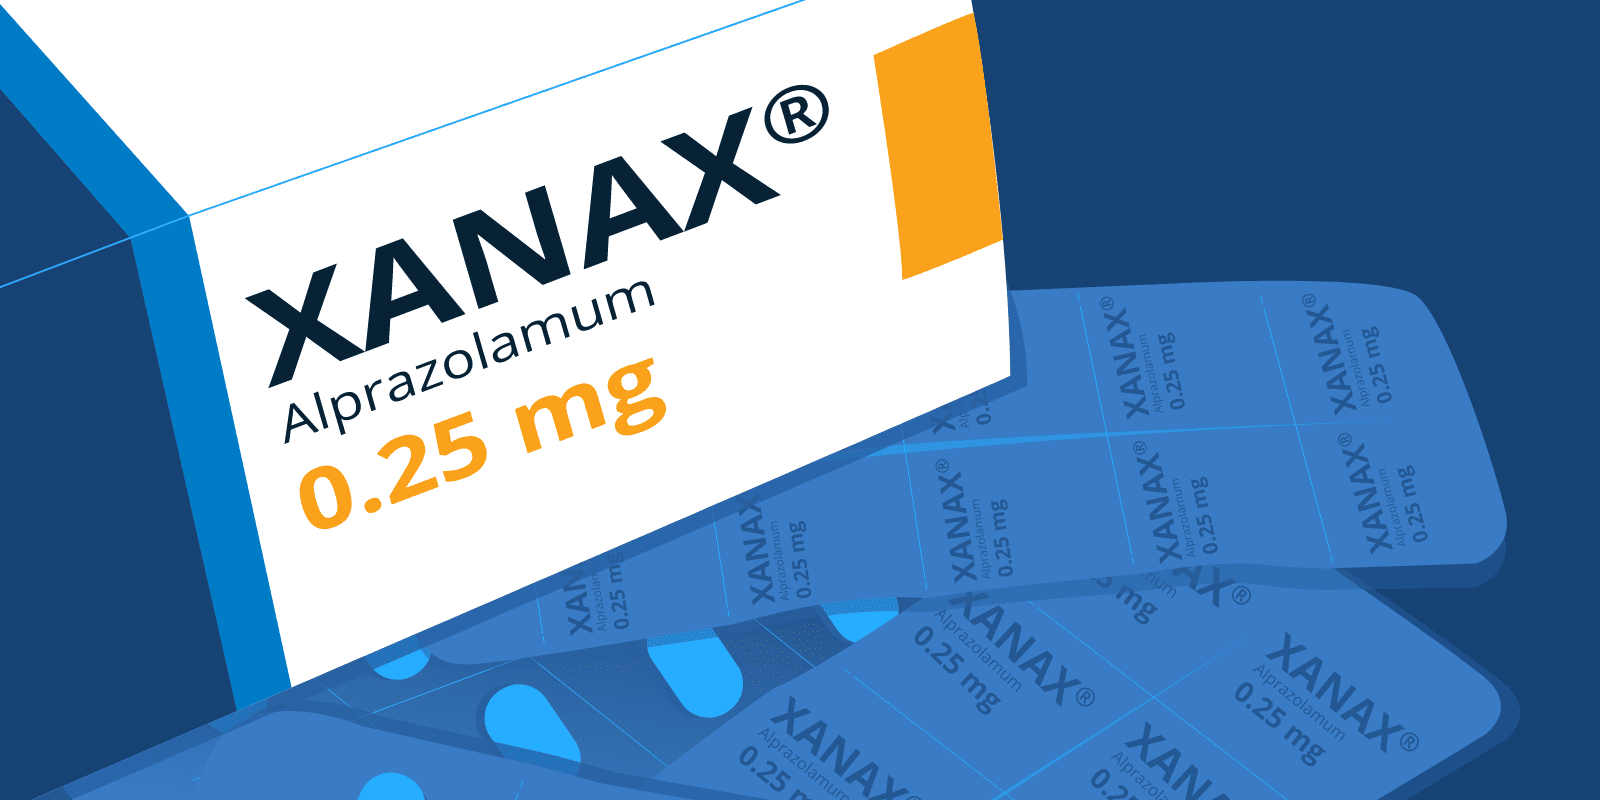 Xanax box and pills graphic in Sandstone Branded colors